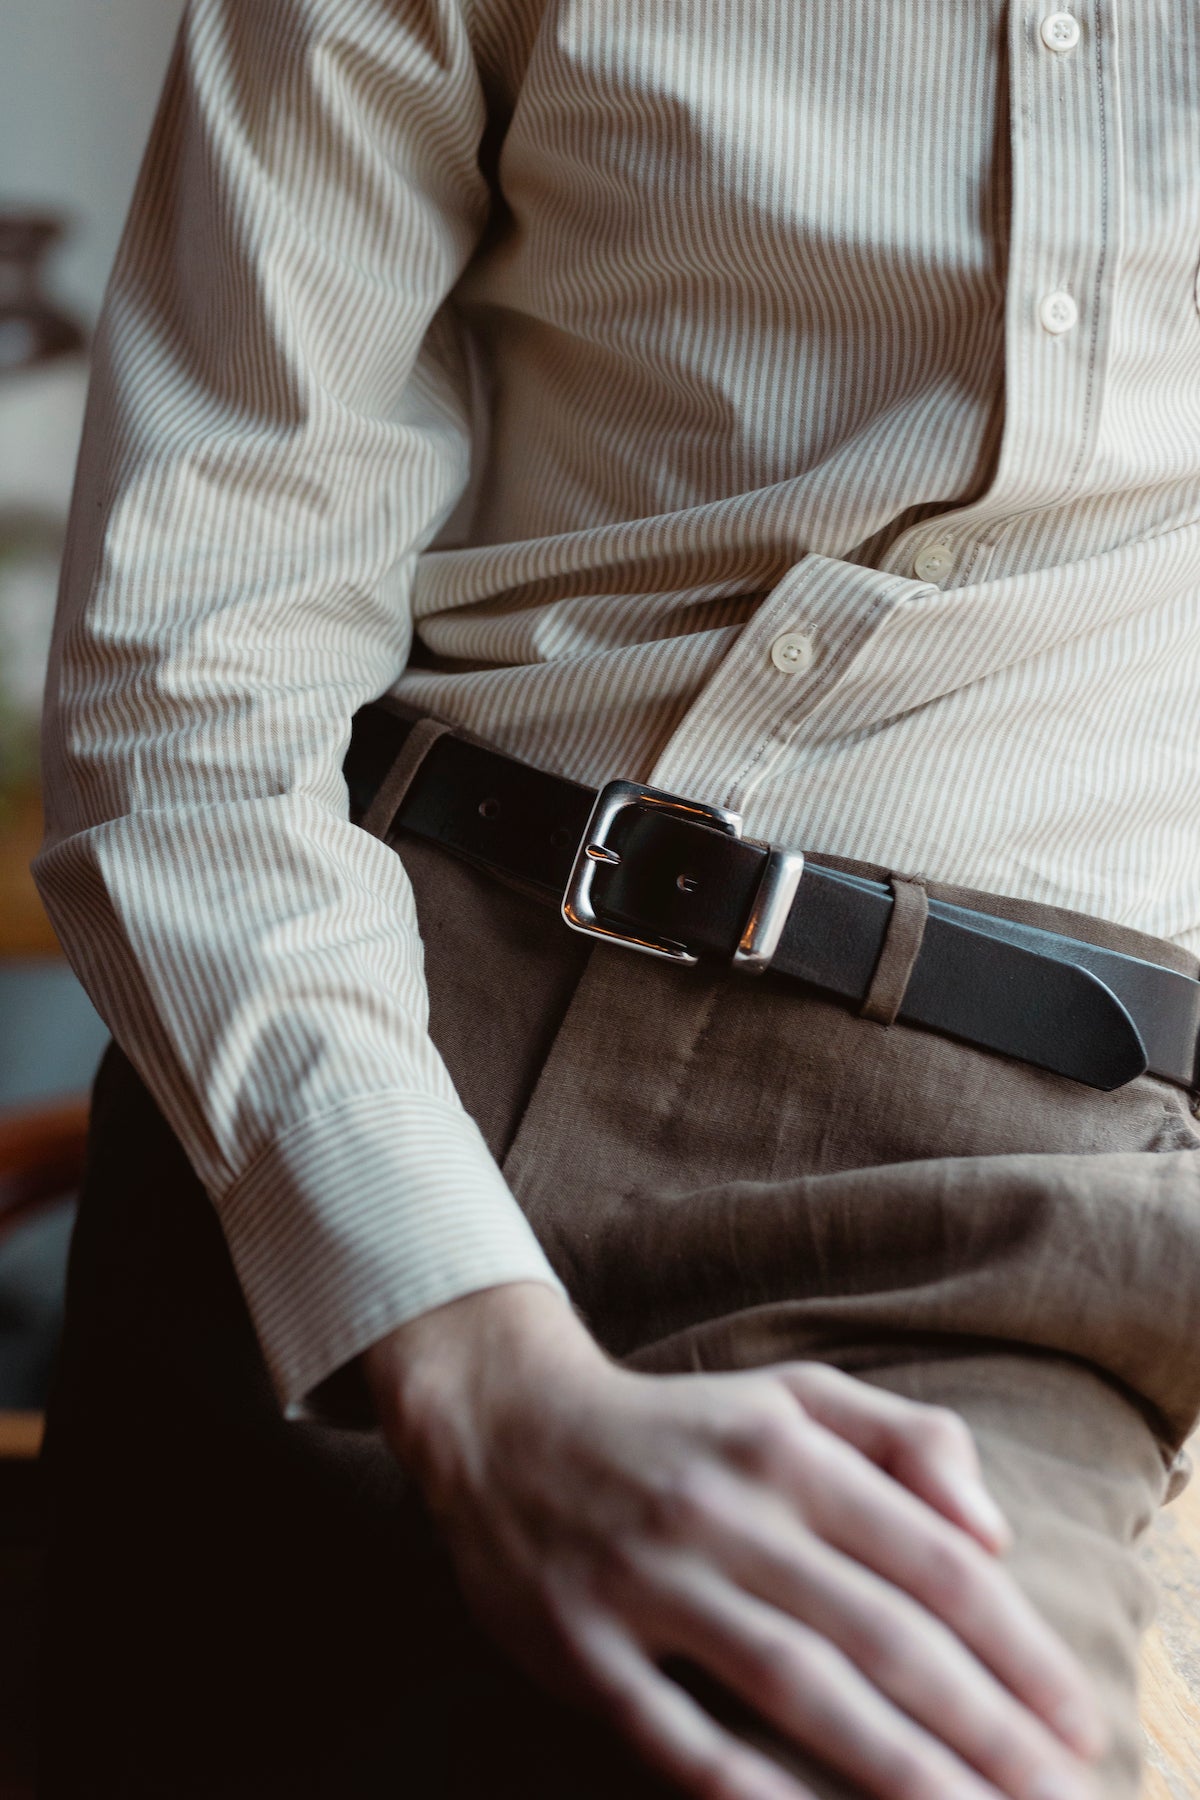 Chocolate Brown Leather Belt, Silver West End Buckle